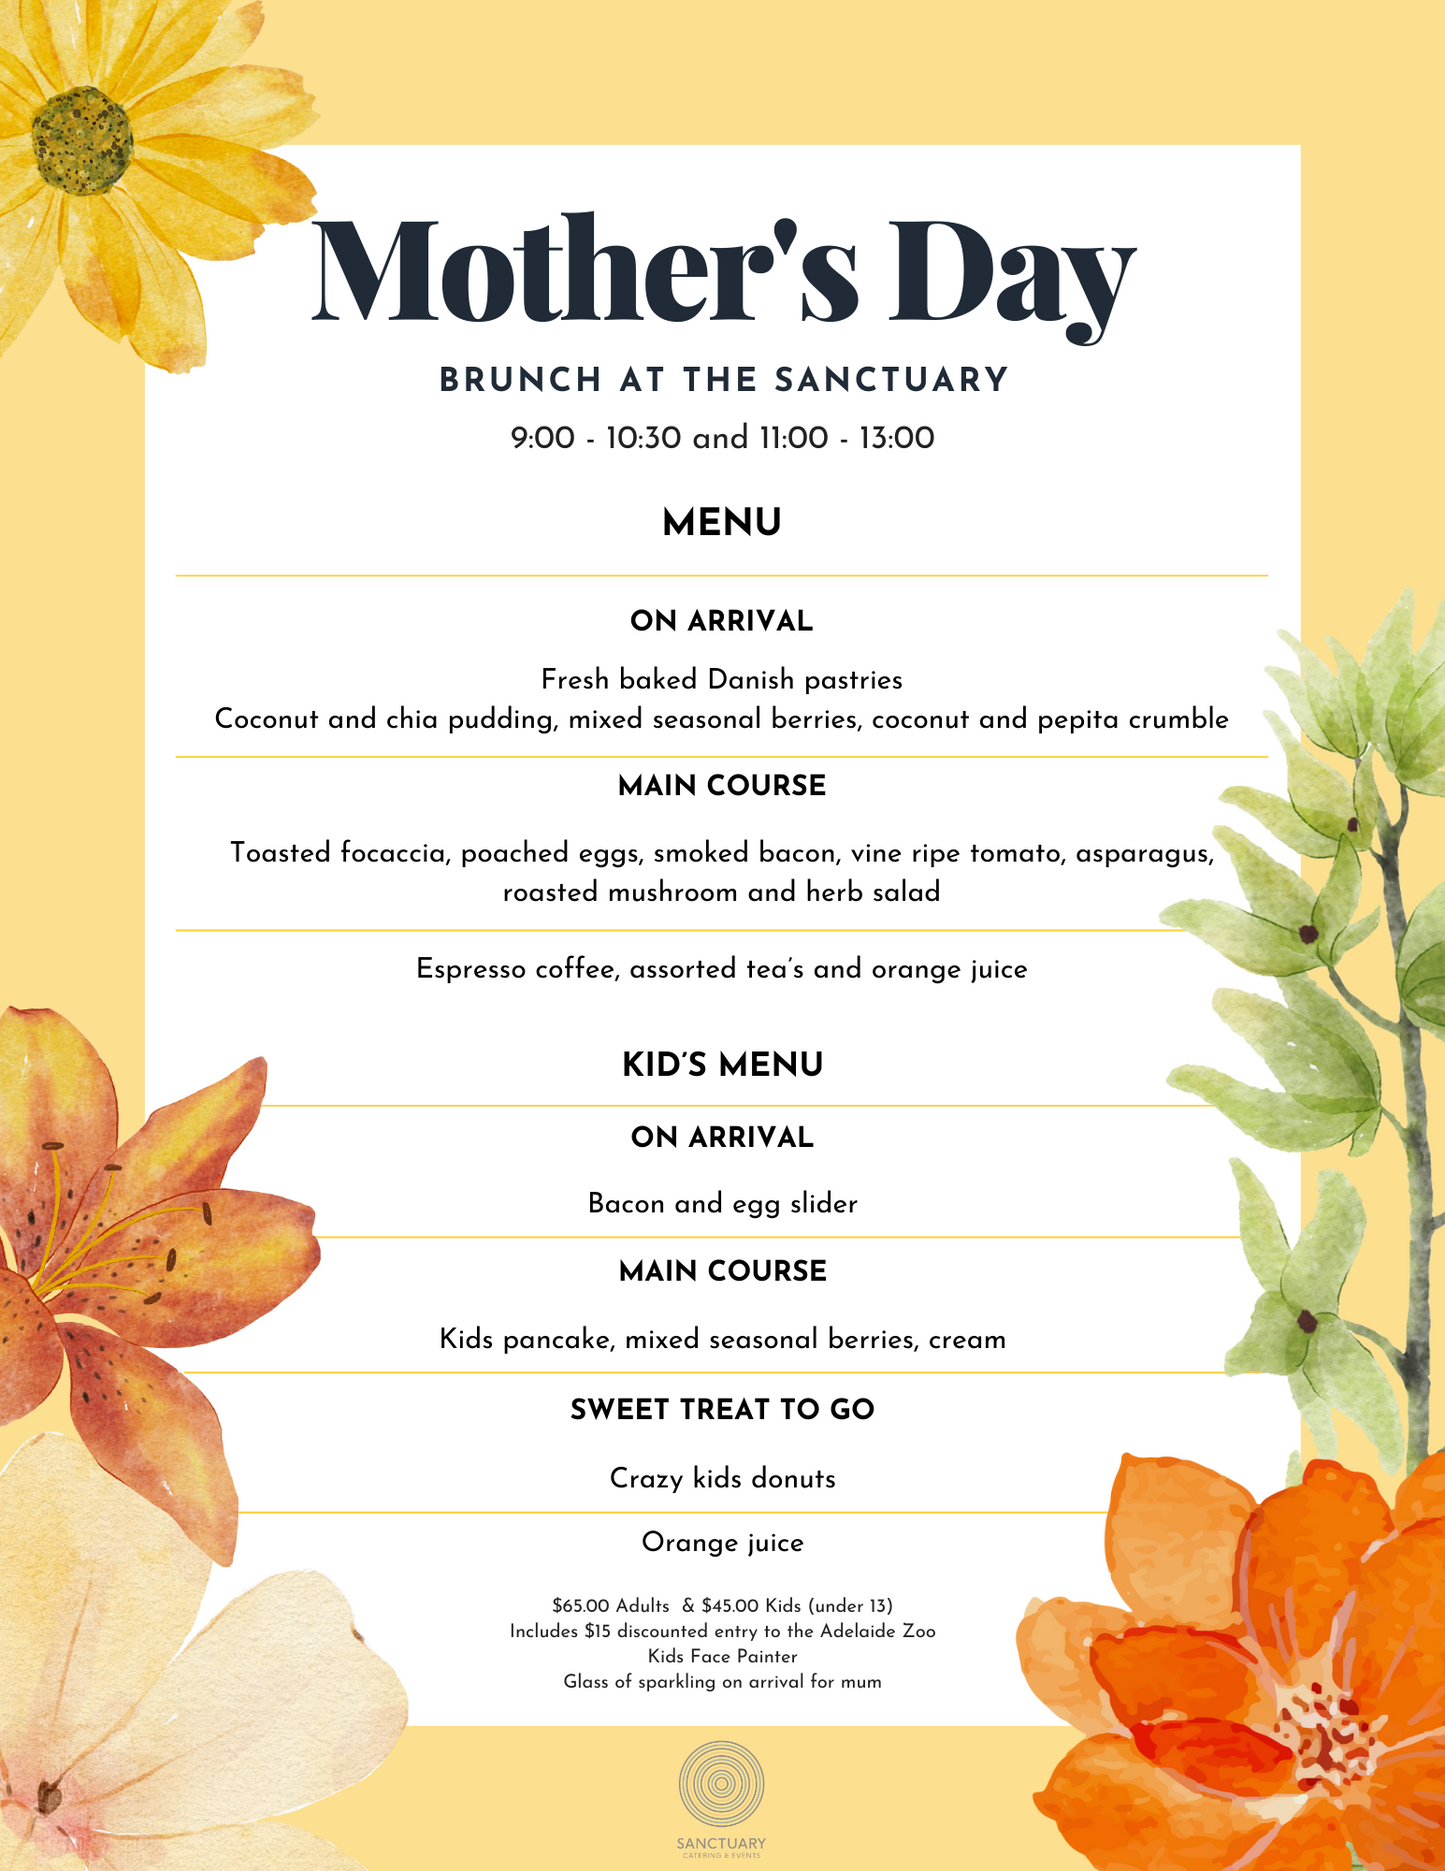 Mother’s Day Brunch at the Sanctuary